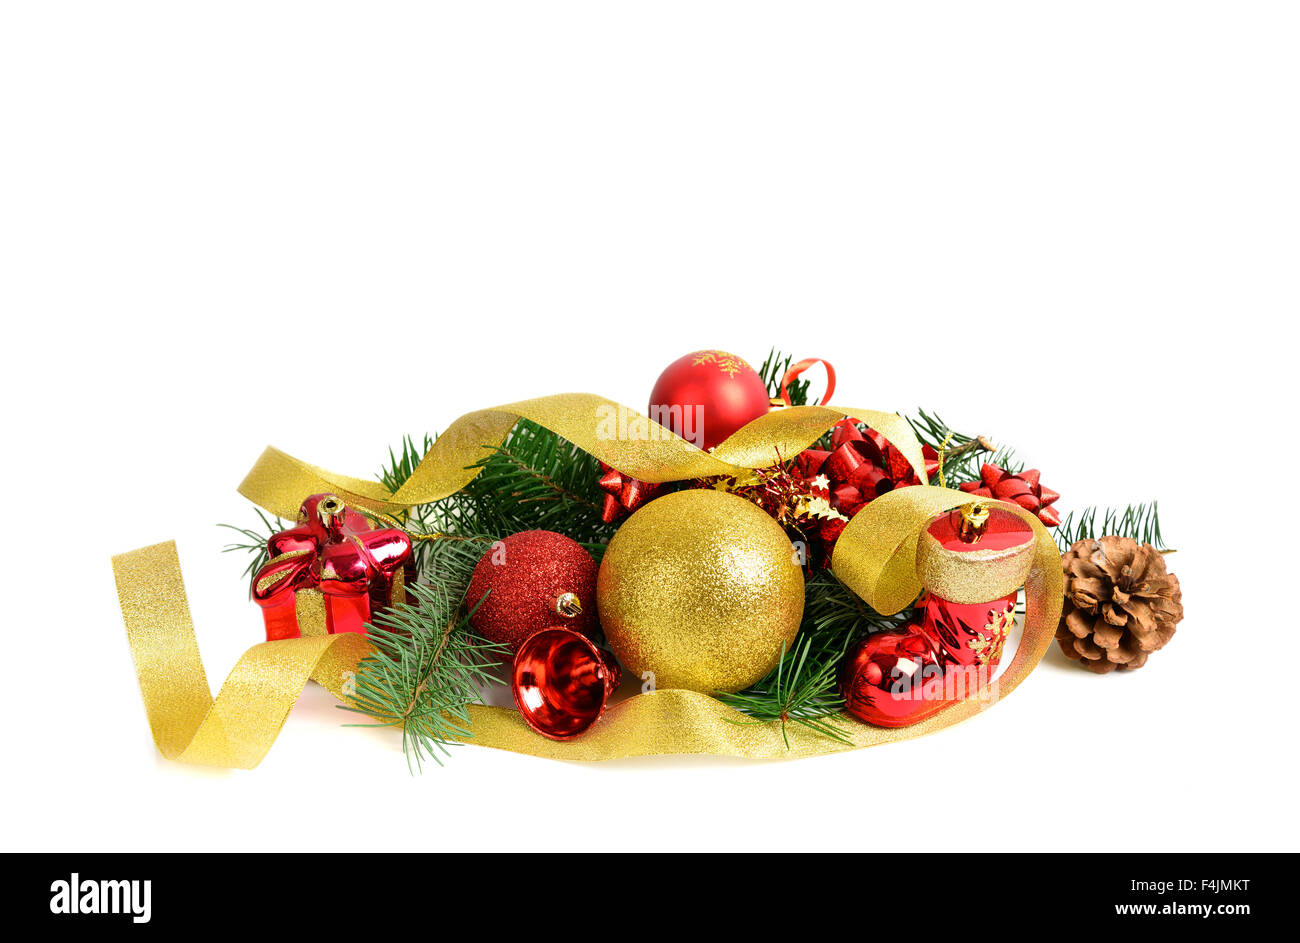 Christmas ornament, isolated on white background Stock Photo